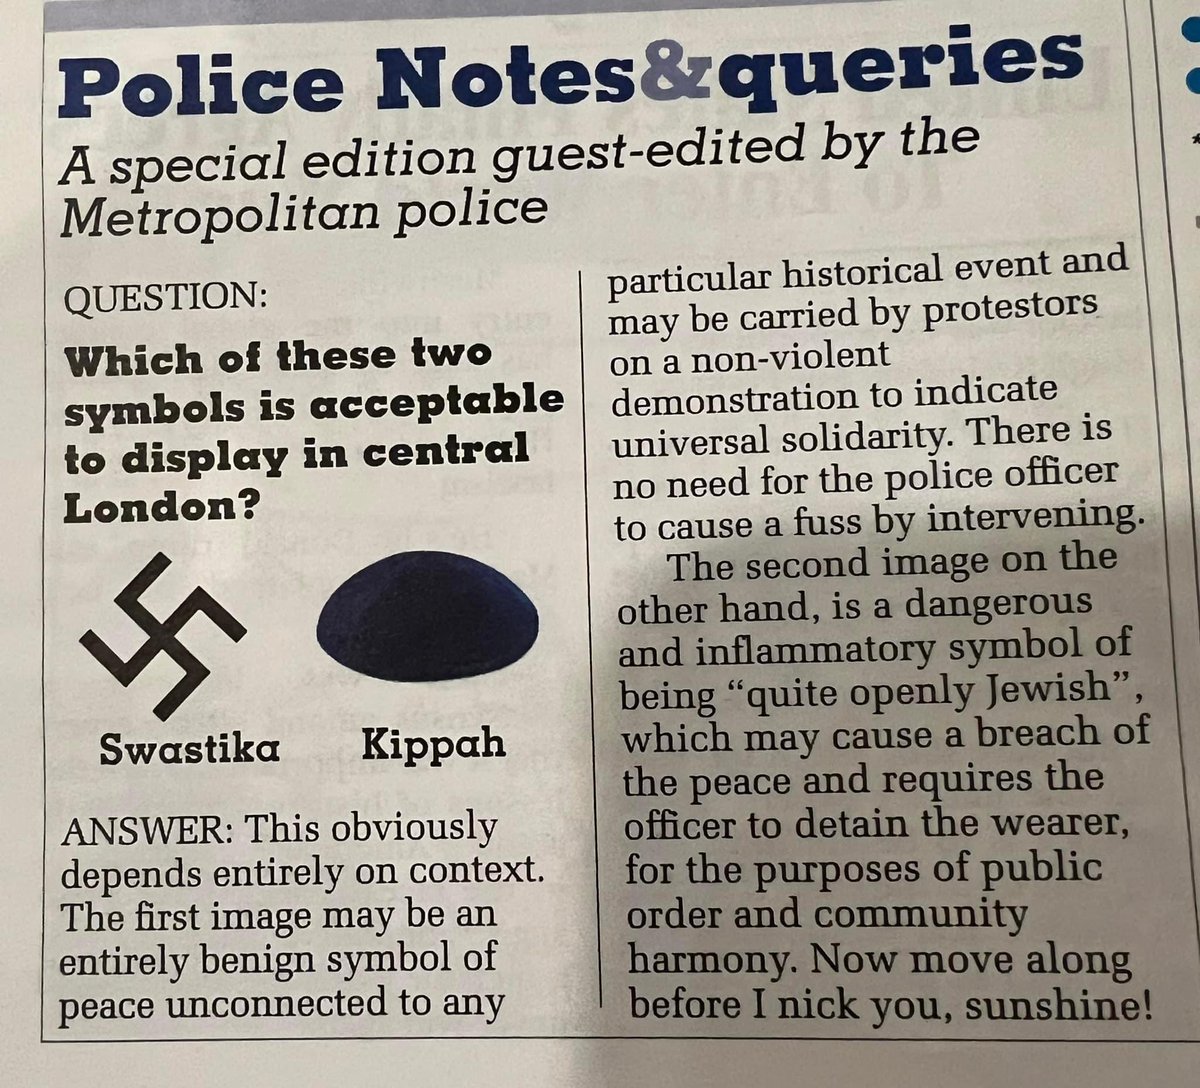 Finally Private Eye havd got onto this issue.